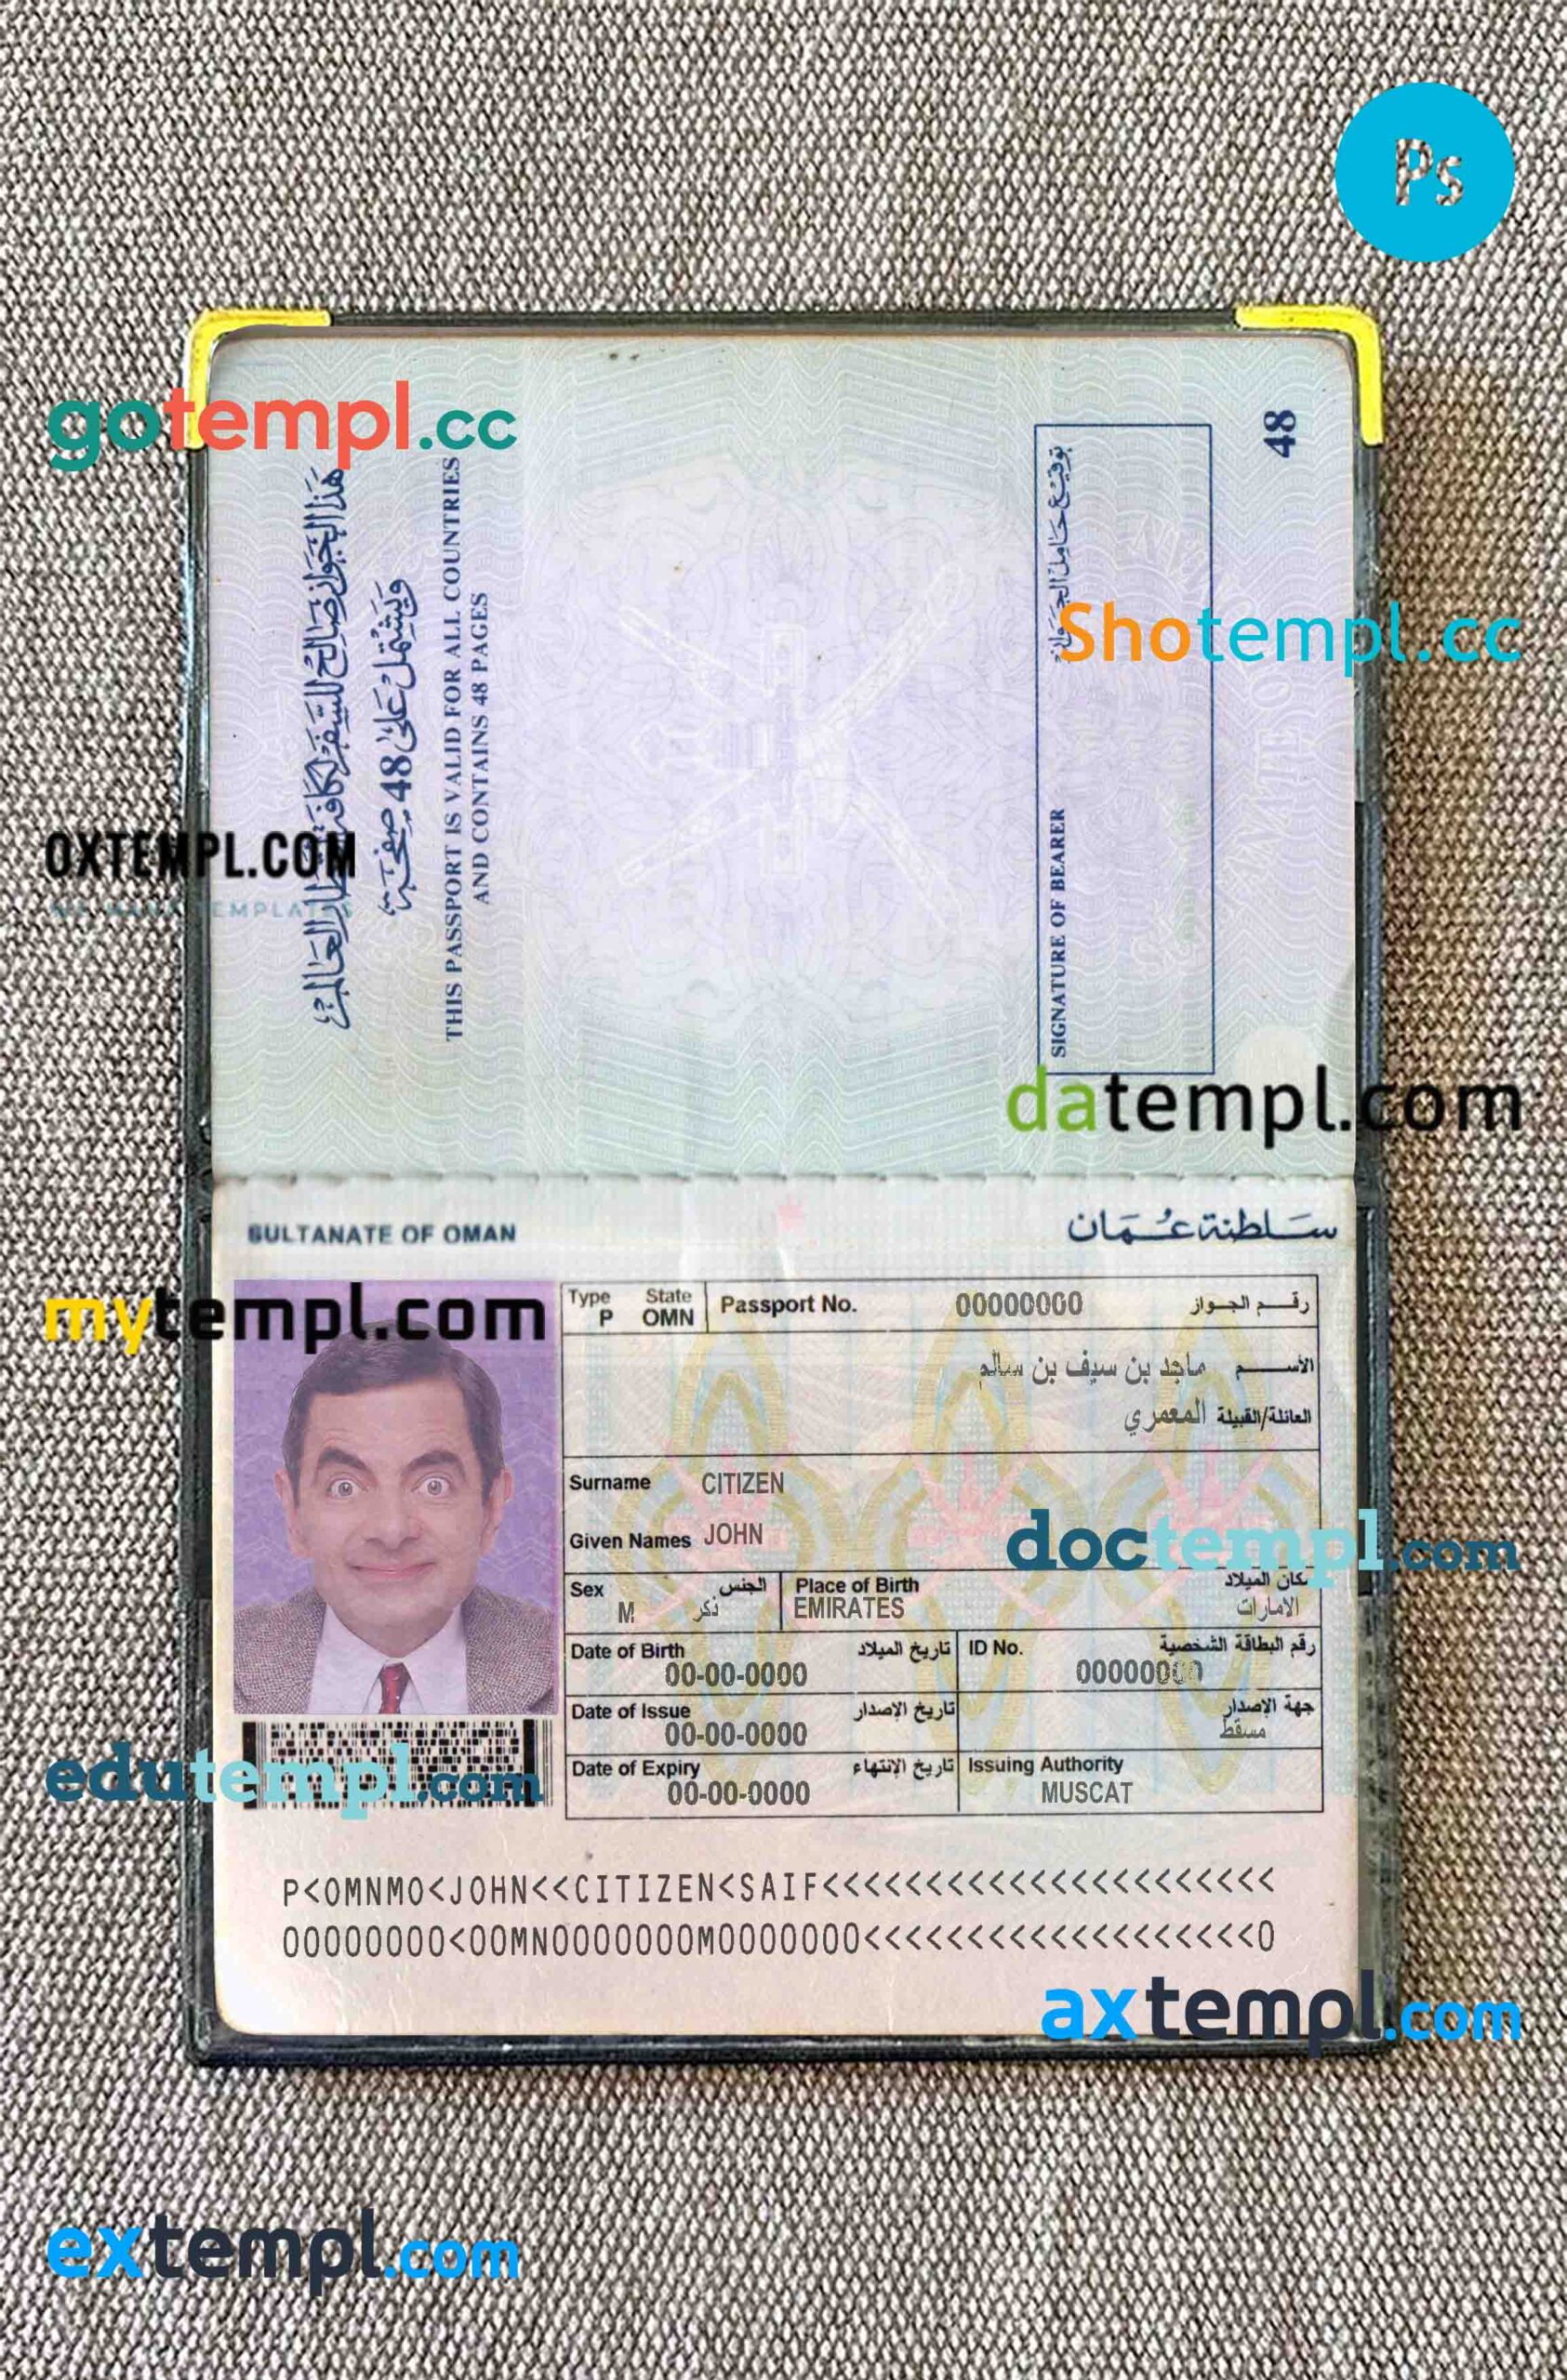 Oman passport PSD files, scan and photograghed image (1995-2005), 2 in 1